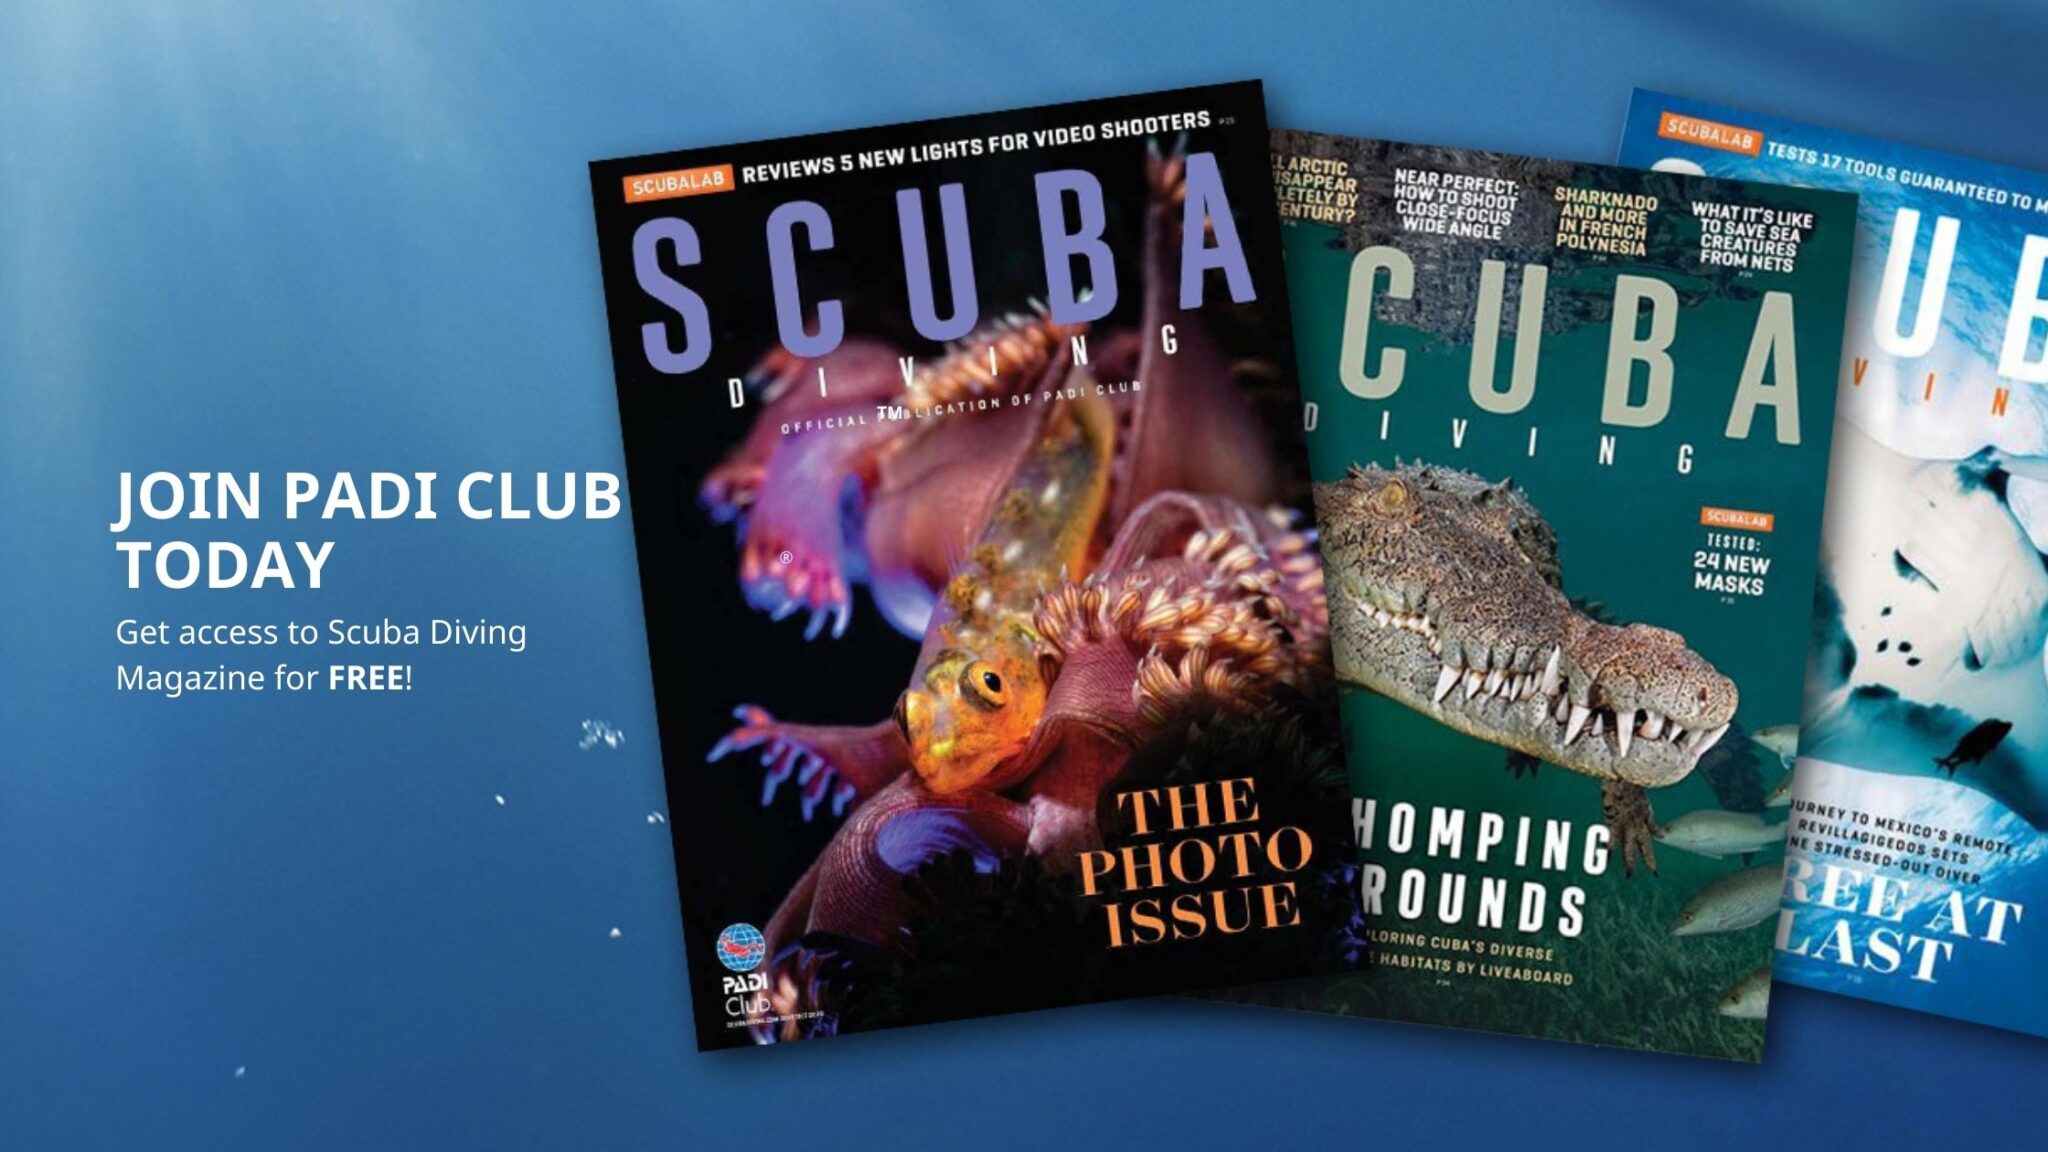 three issues of scuba diving magazine, a PADI Club benefit